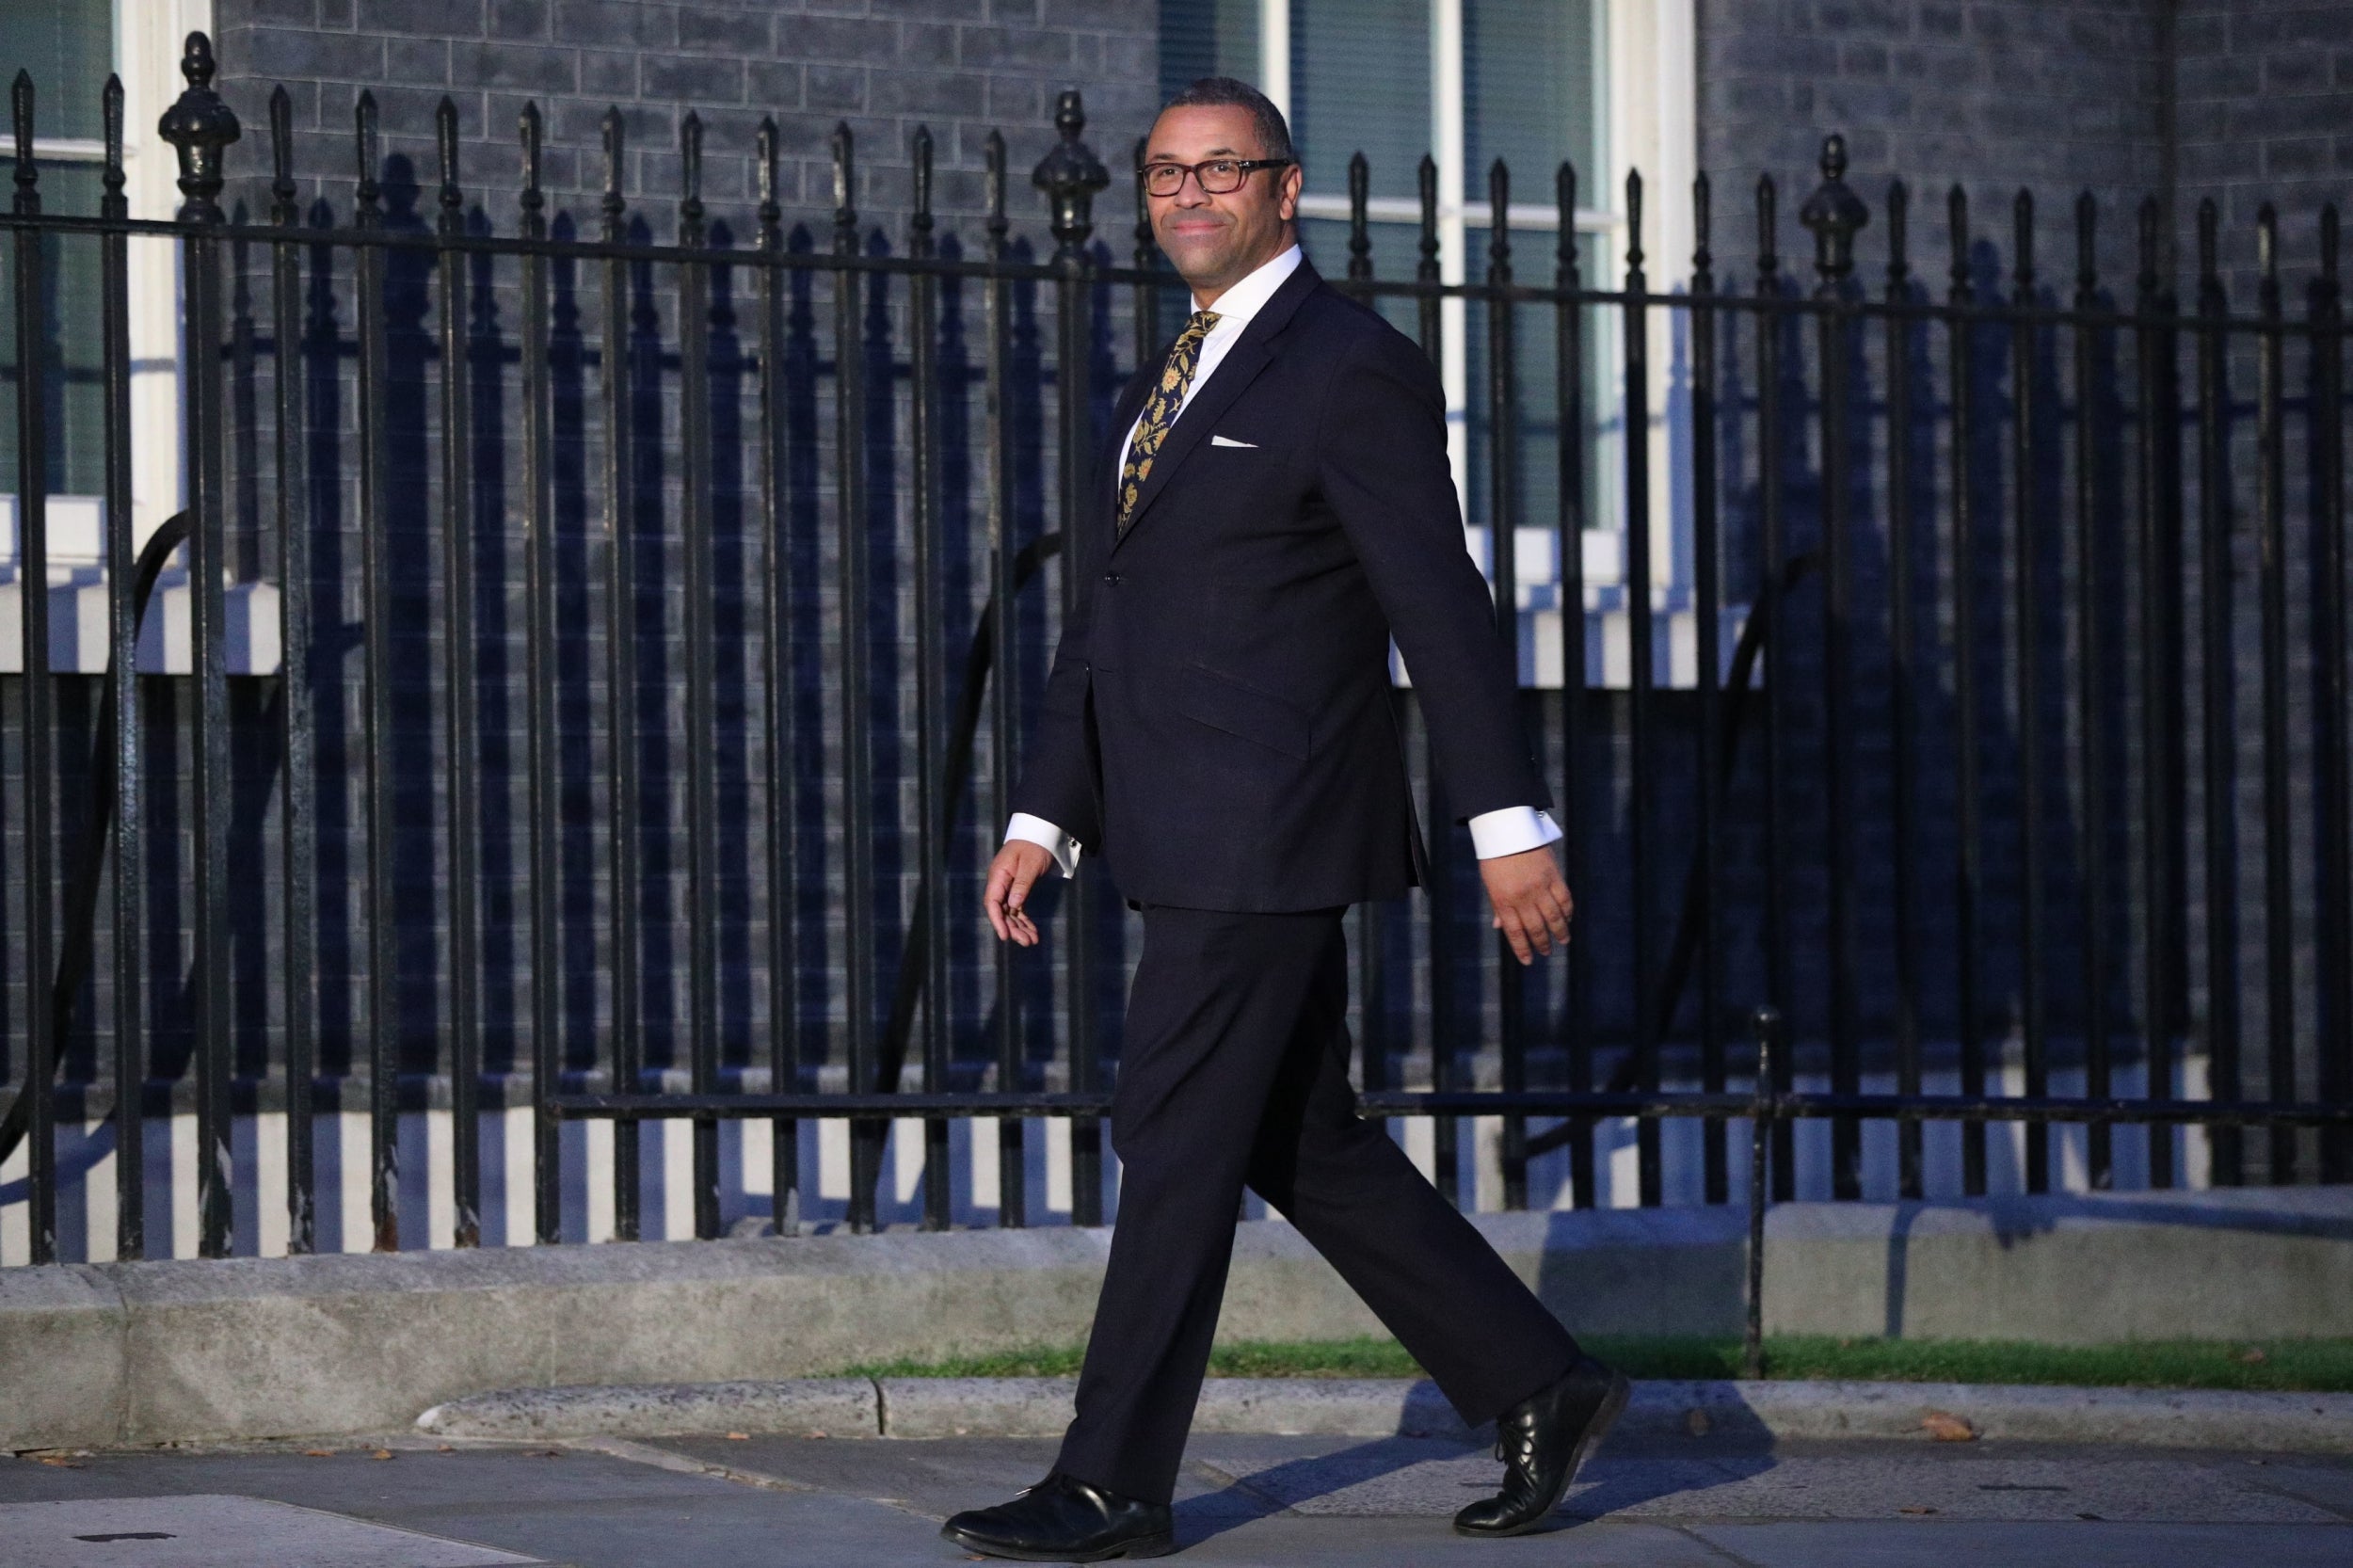 In: James Cleverly